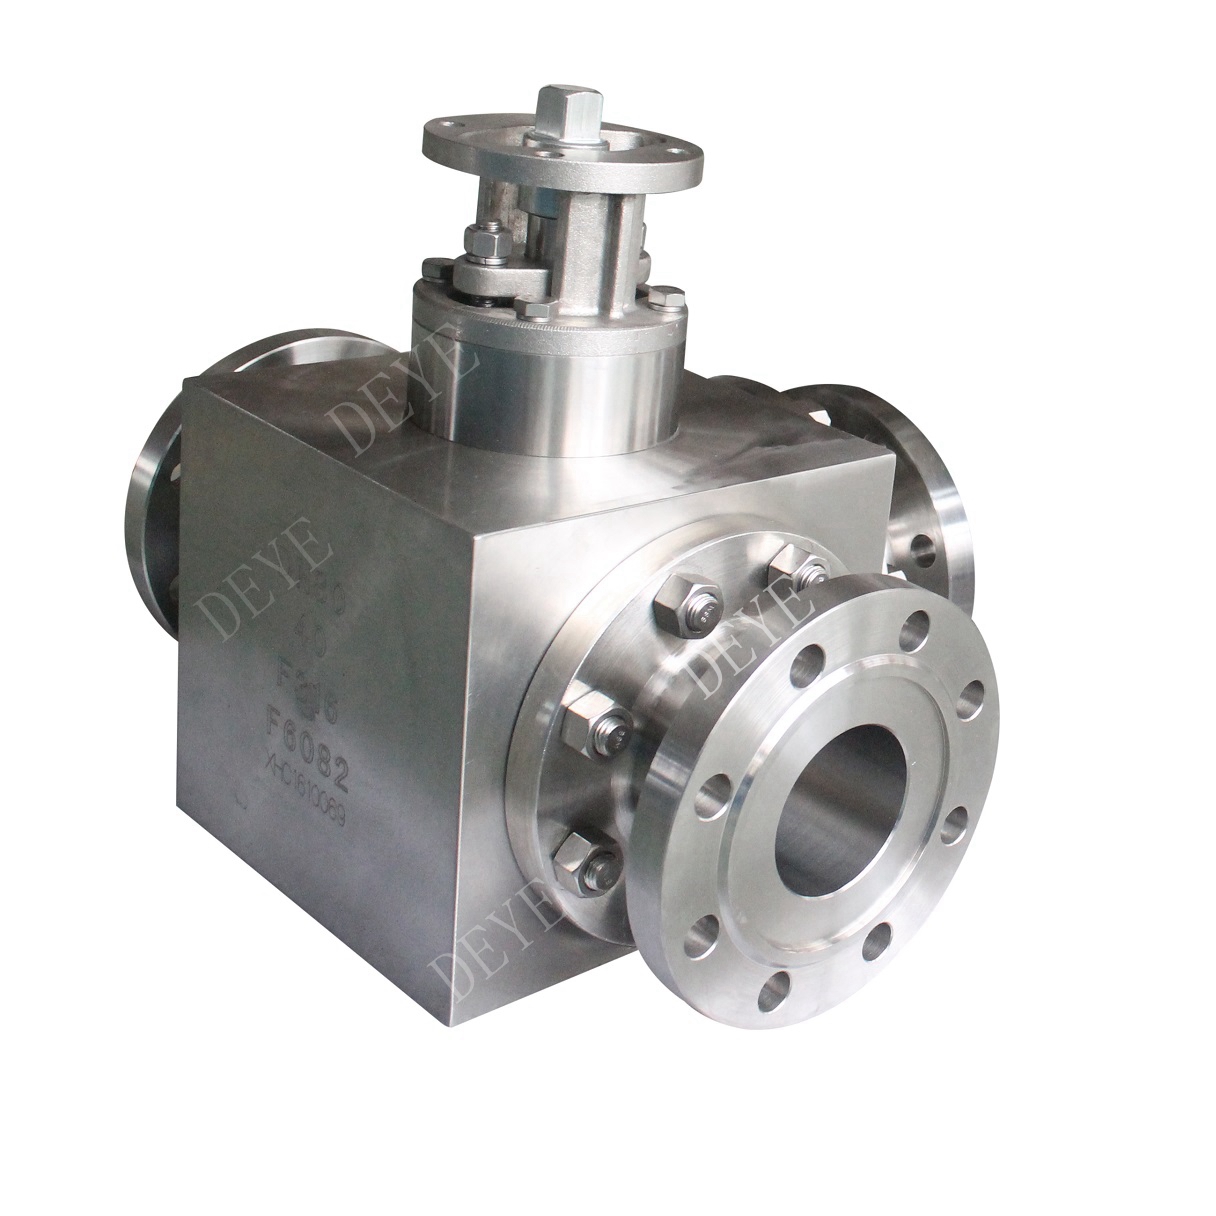 Wholesale Price 2 Pc Ball Valve -
  300LBS stainless steel 3-way ball valve with Flanged ends  BV-300-3WYF – Deye